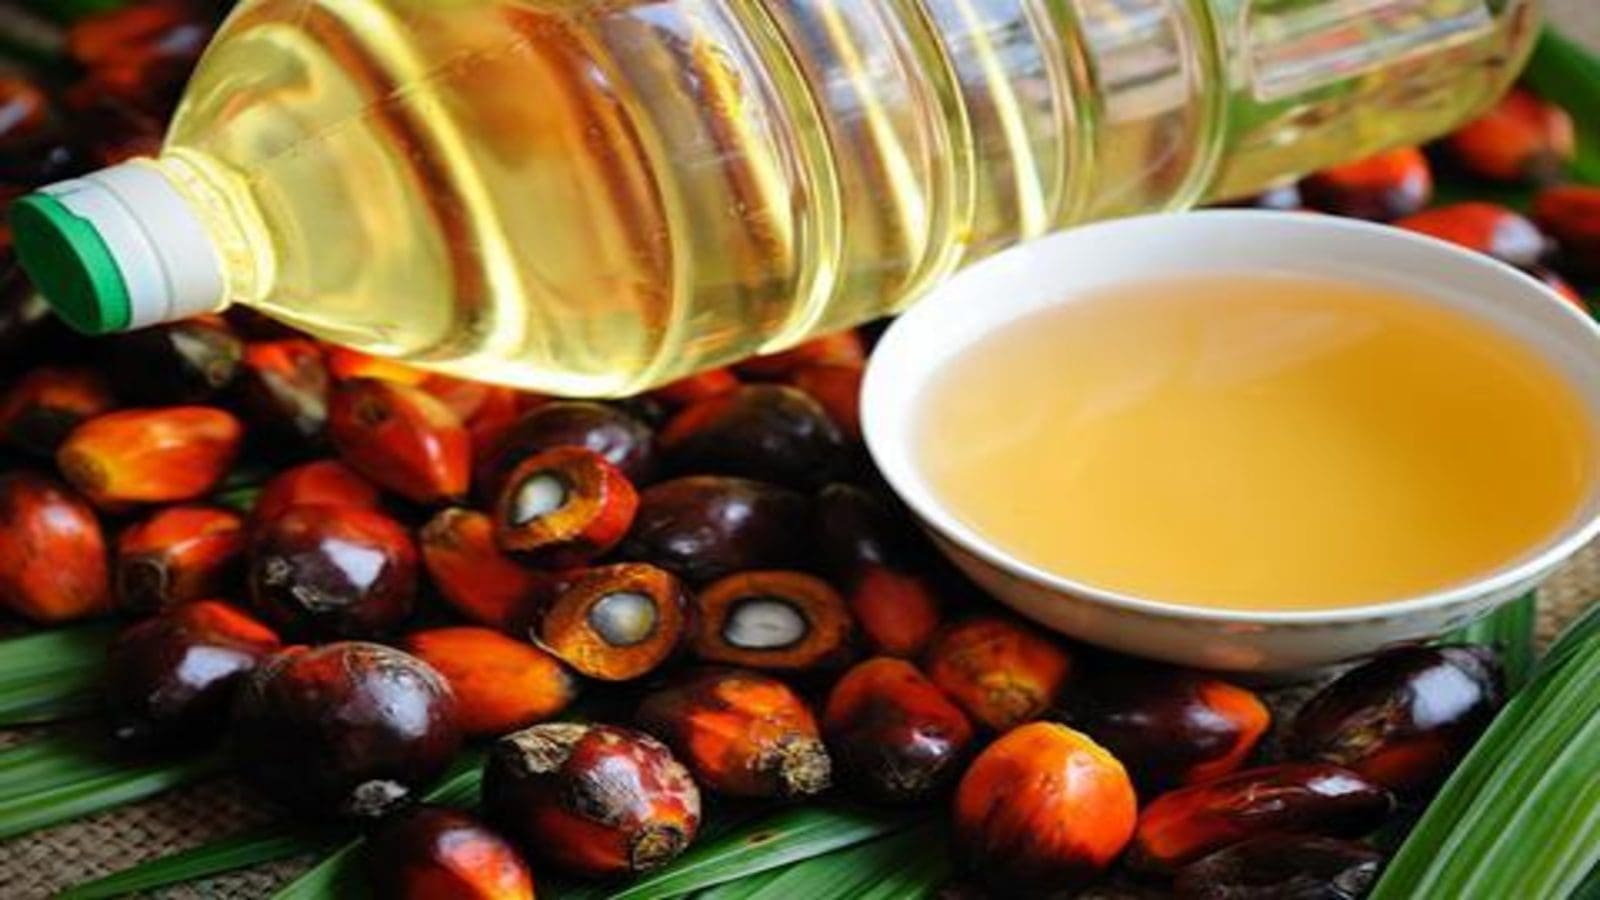 Nigeria’s palm oil imports from Malaysia surges 353% in 4months as demand rises